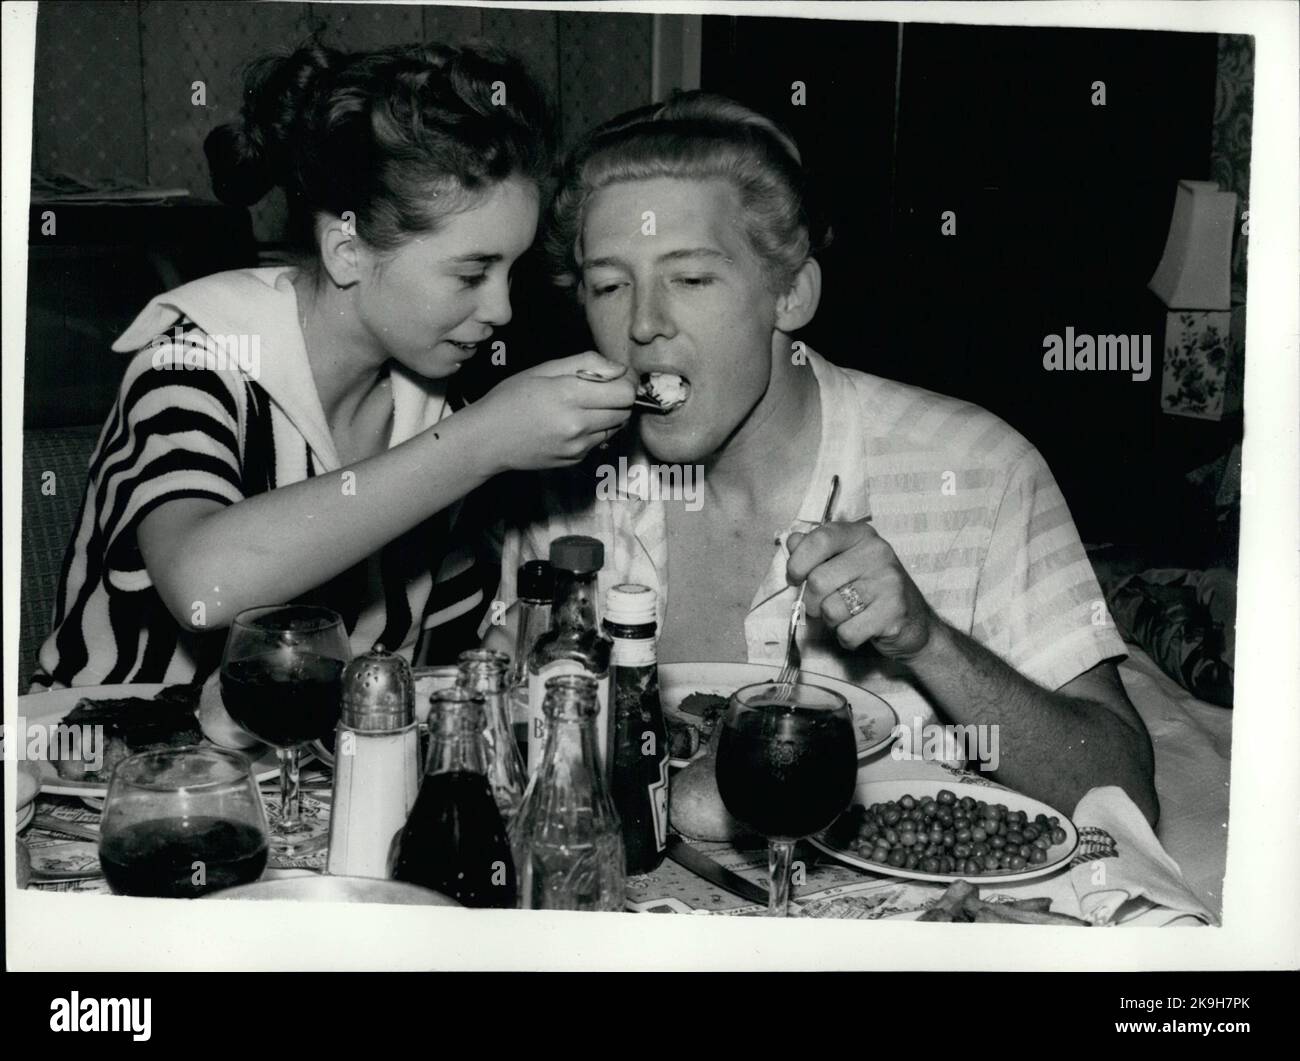 May 05, 1958 - Singer Jerry Lee Lewis and his child bride: Singer Jerry Lee Lewis may have to cut short his theatrical tour of Britain - because of the publicity over his thirteen year old bride. It has been said that the marriage to Myra took place before his divorce from his second wife had been obtained. When he appeared at the Granada, Tooting a crowd of teenagers stood outside the stage doot chanting ''We hate Jerry Lewis'', ''Baby snatcher'' and ''Watch him wheel his wife out in a pram''. Photo shows Myra the thirteen year old wife foods Jerry Lee Lewis in their hotel room last night. (C Stock Photo